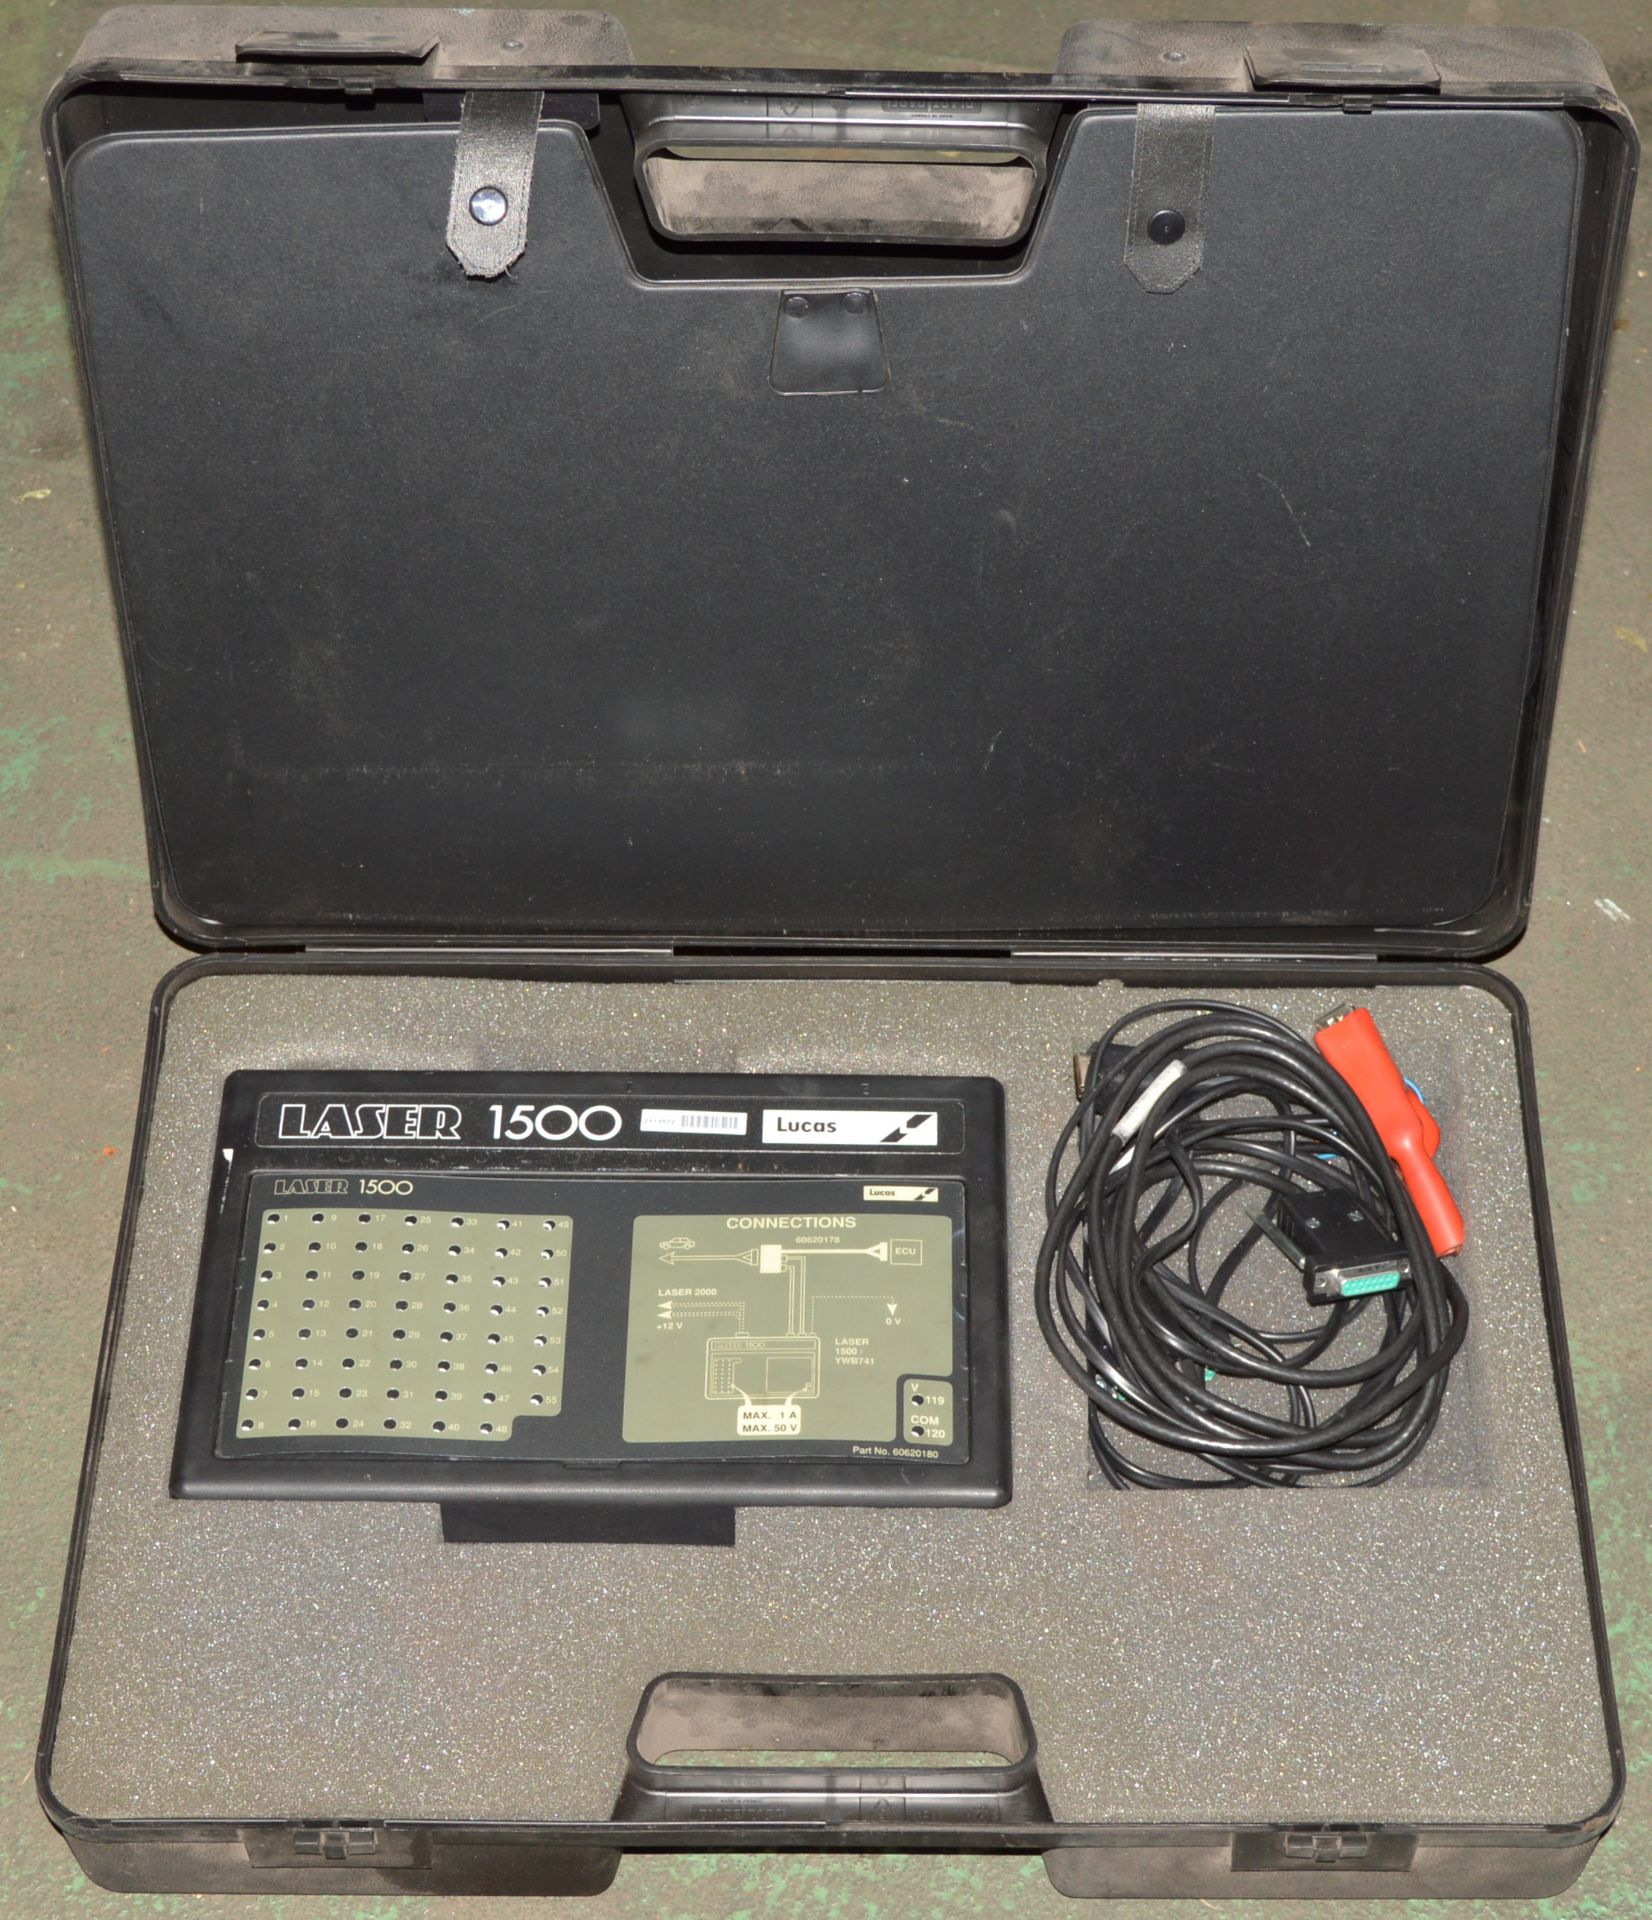 Lucas Laser 1500 Electronic Systems Tester